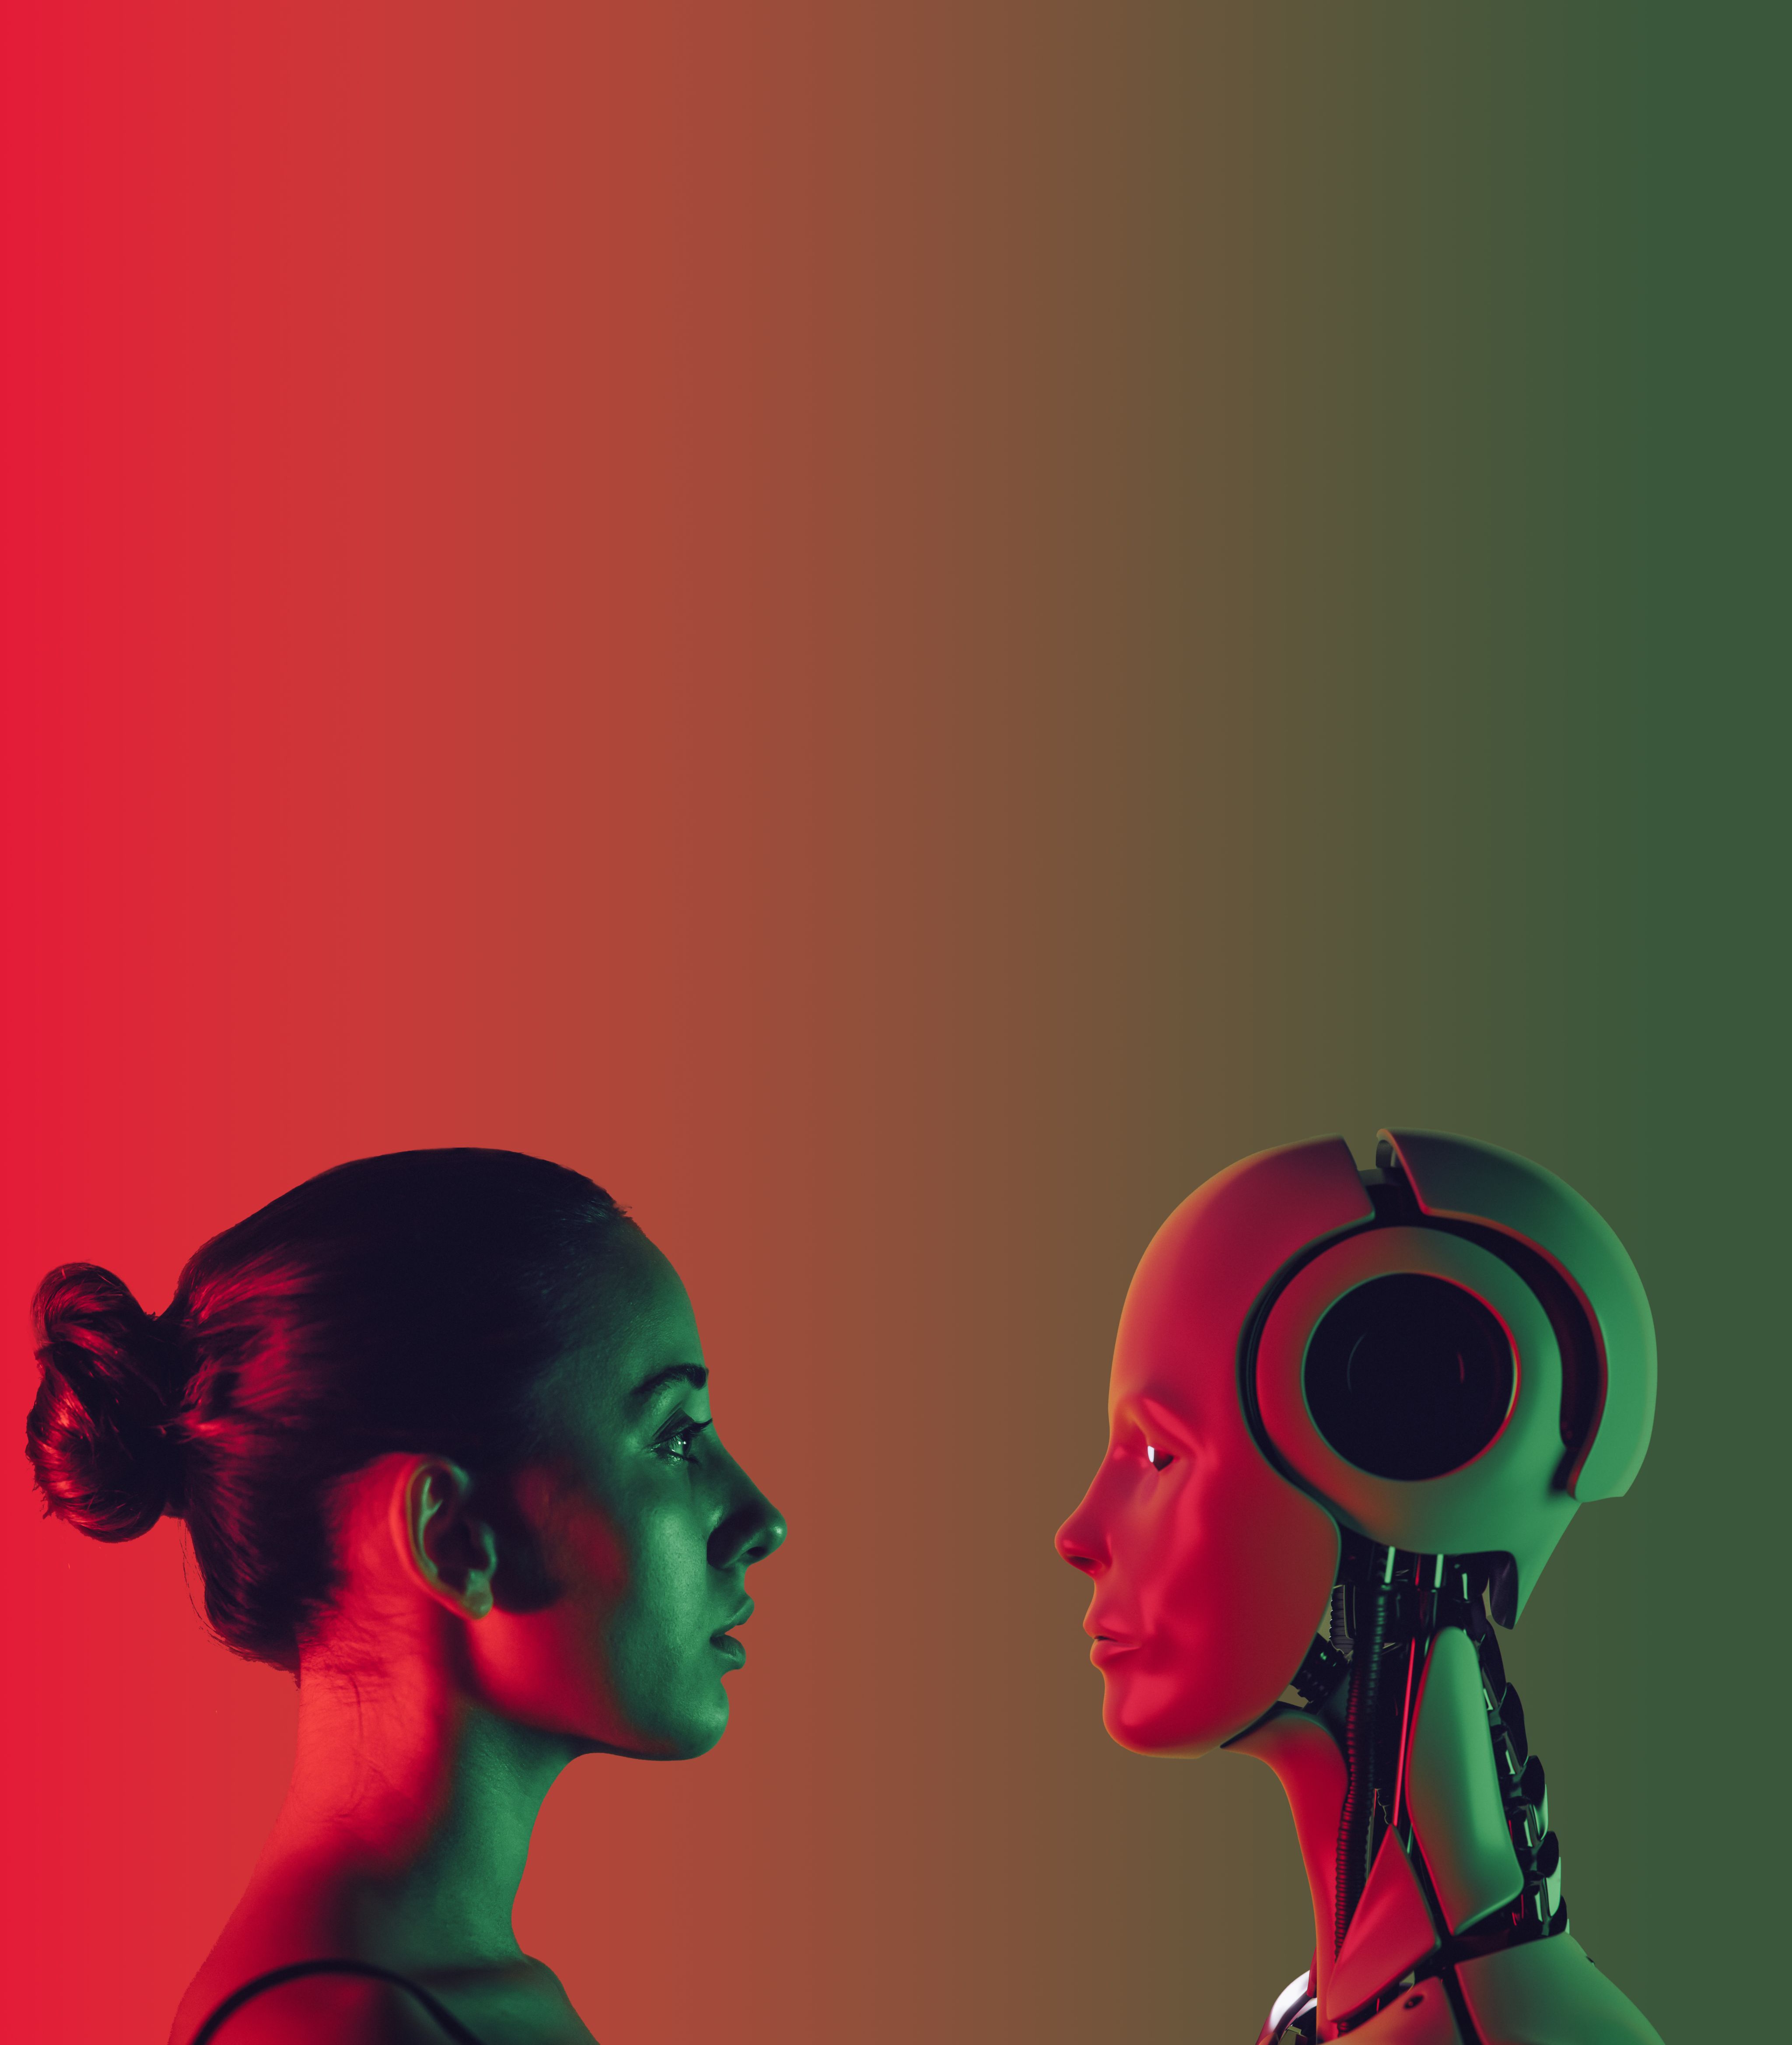 Profile of a woman's head with her hair in a bun looking at the profile of a robot head with a humanoid face. they are in front of a gradient background that fades from red to greeen.